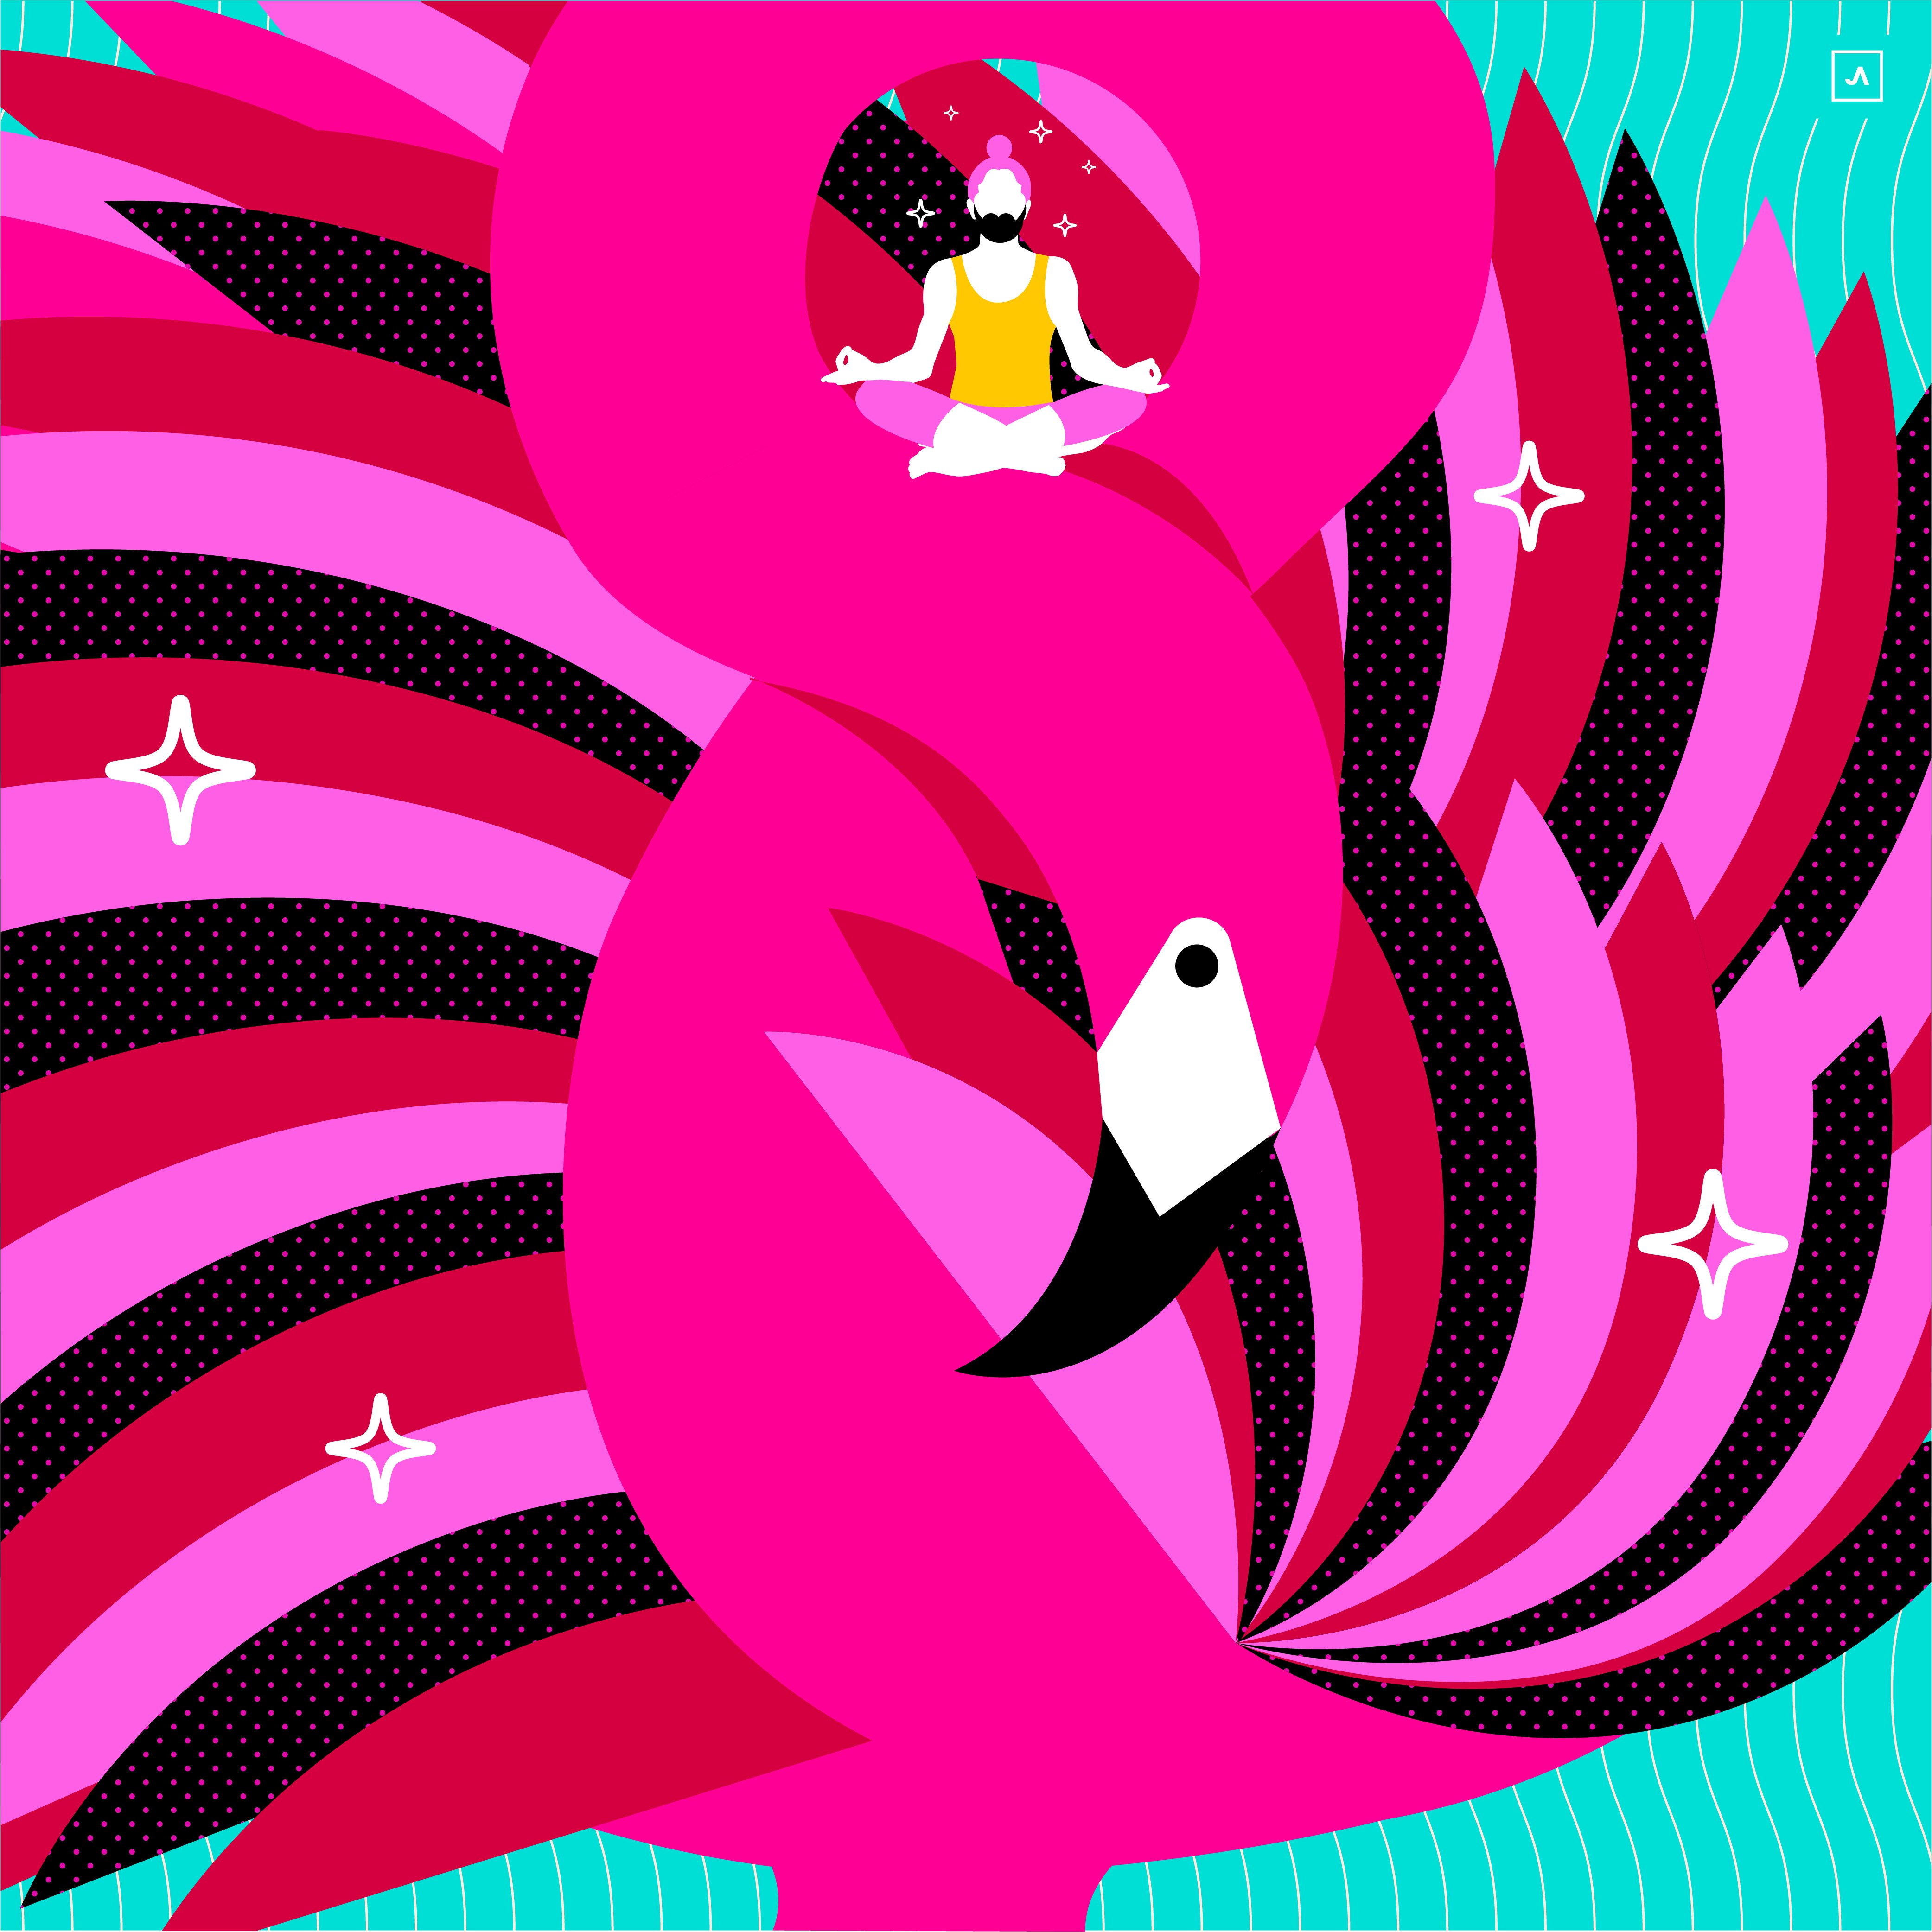 Jacober Creative Define your brand. Illustration of flamingo with Man on neck doing a lotus pose.